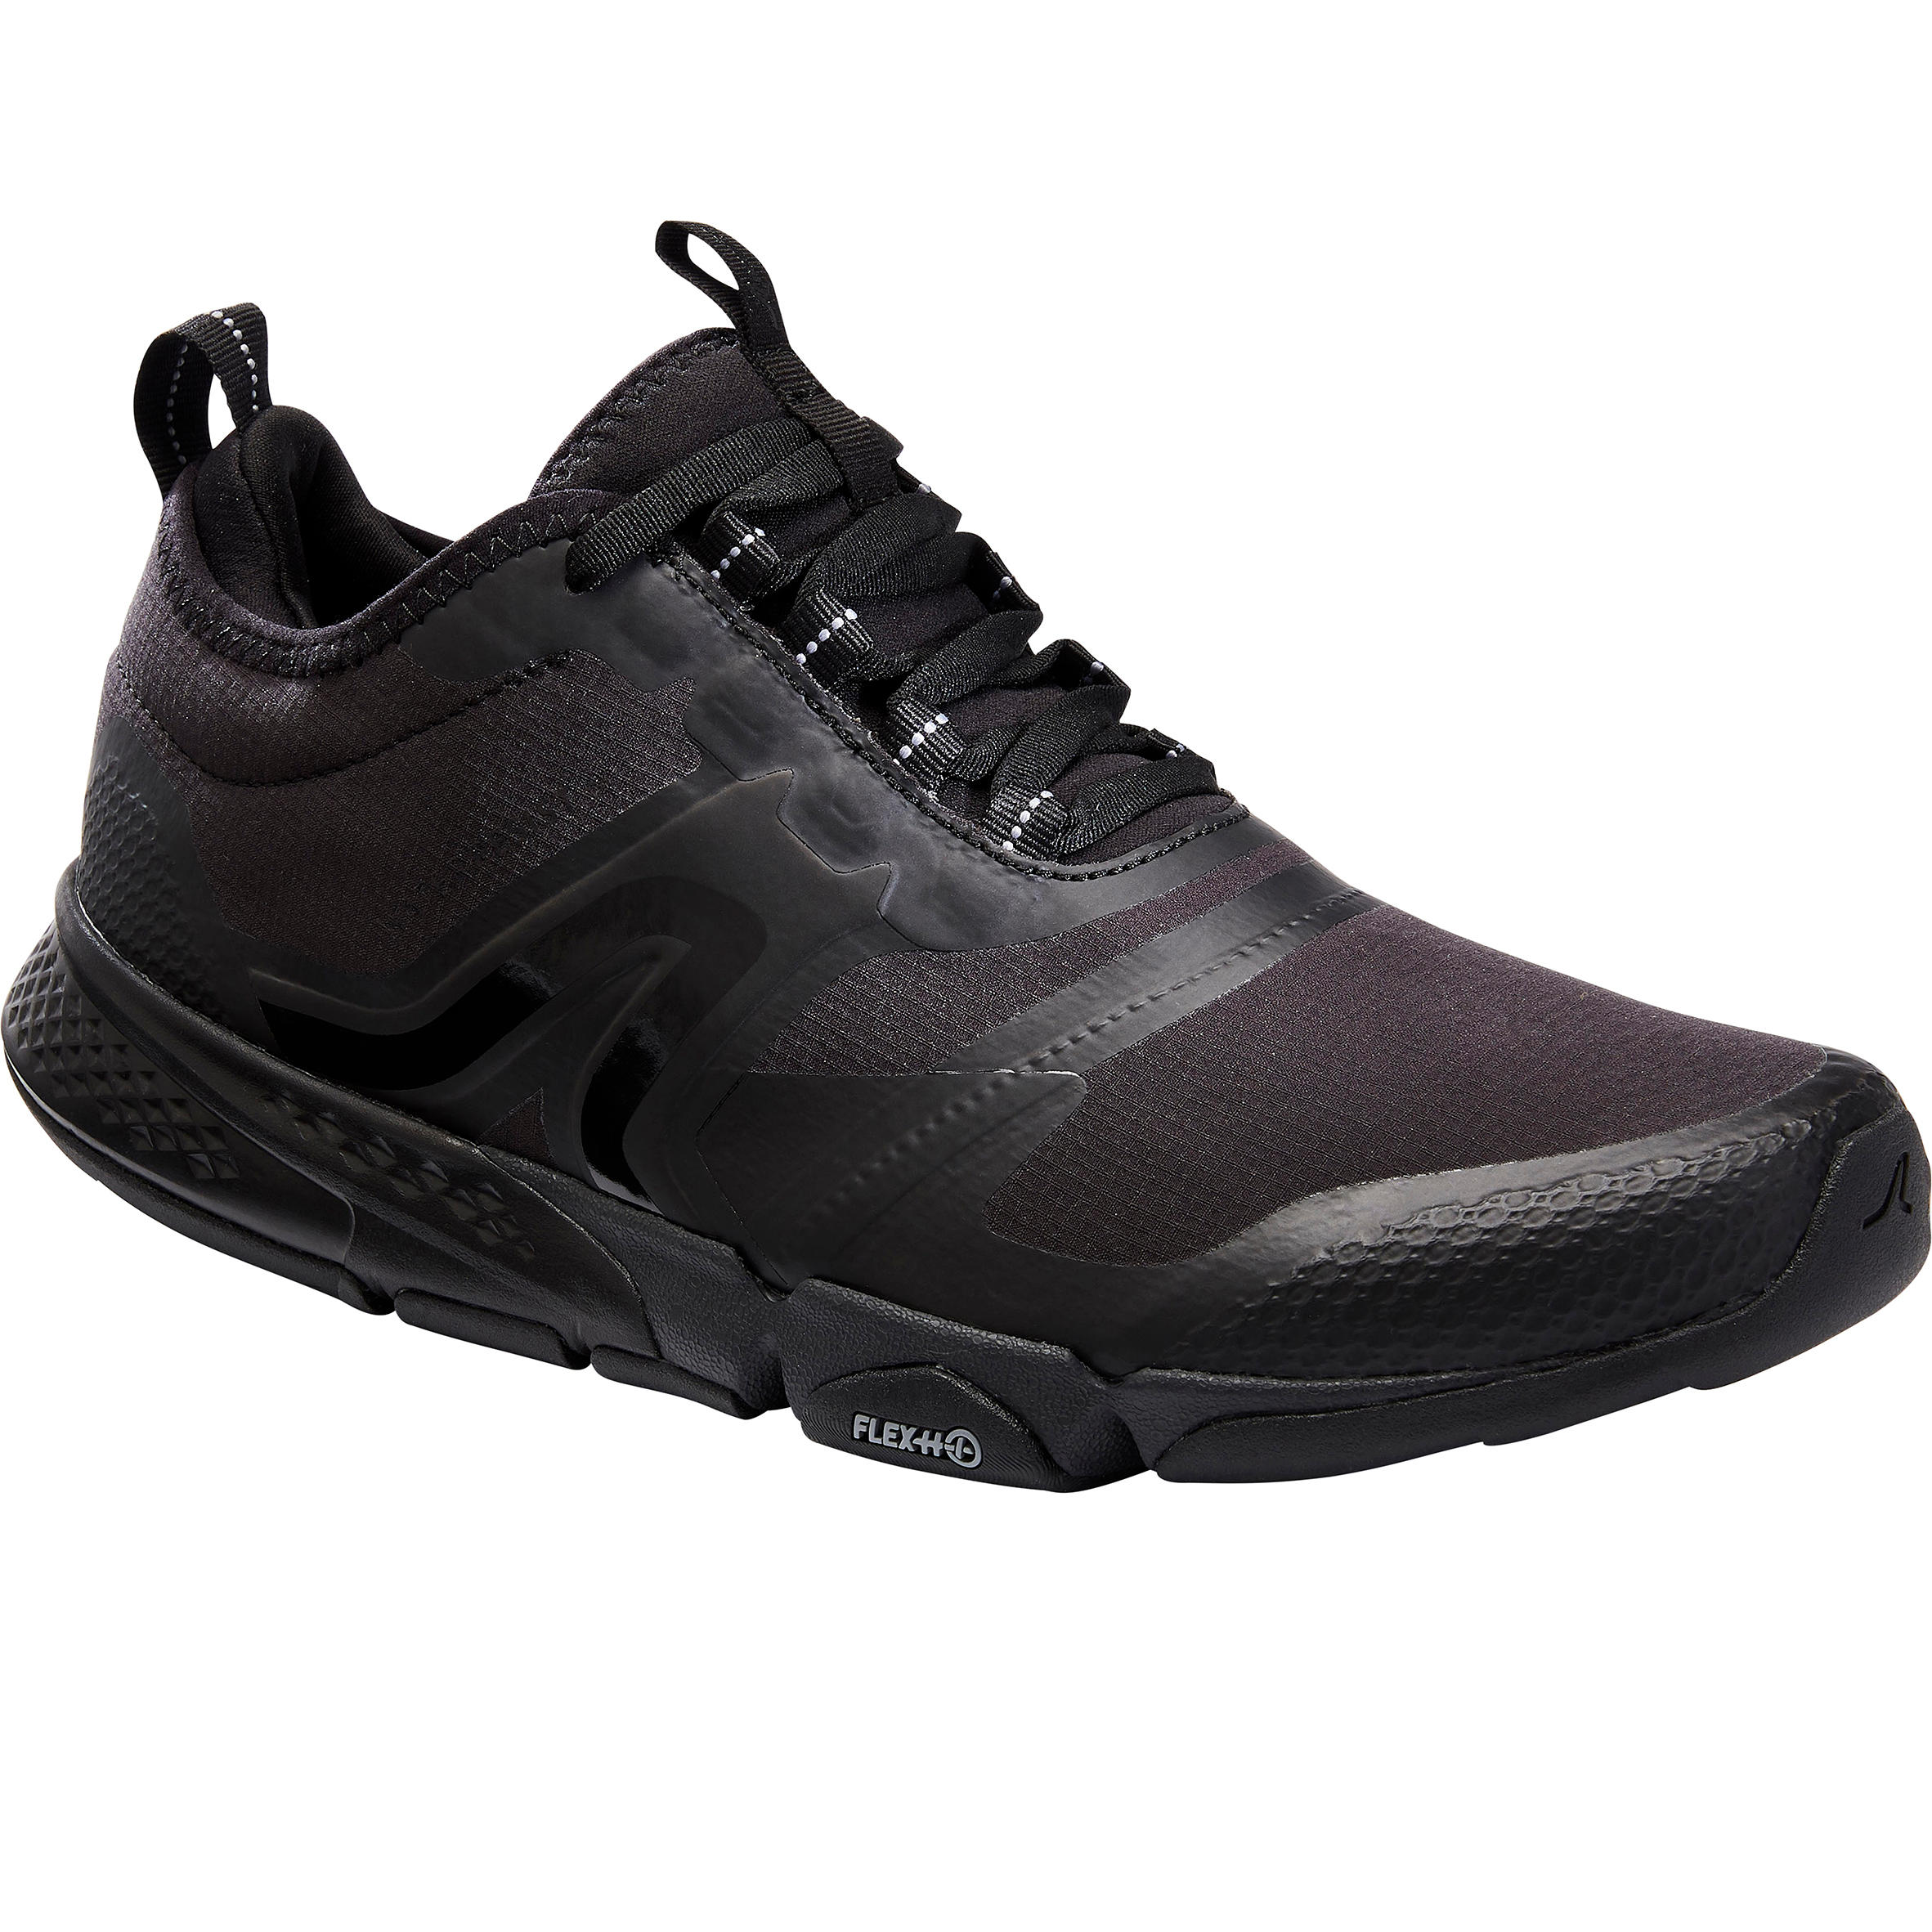 Buy Water repellent Walking shoes for 